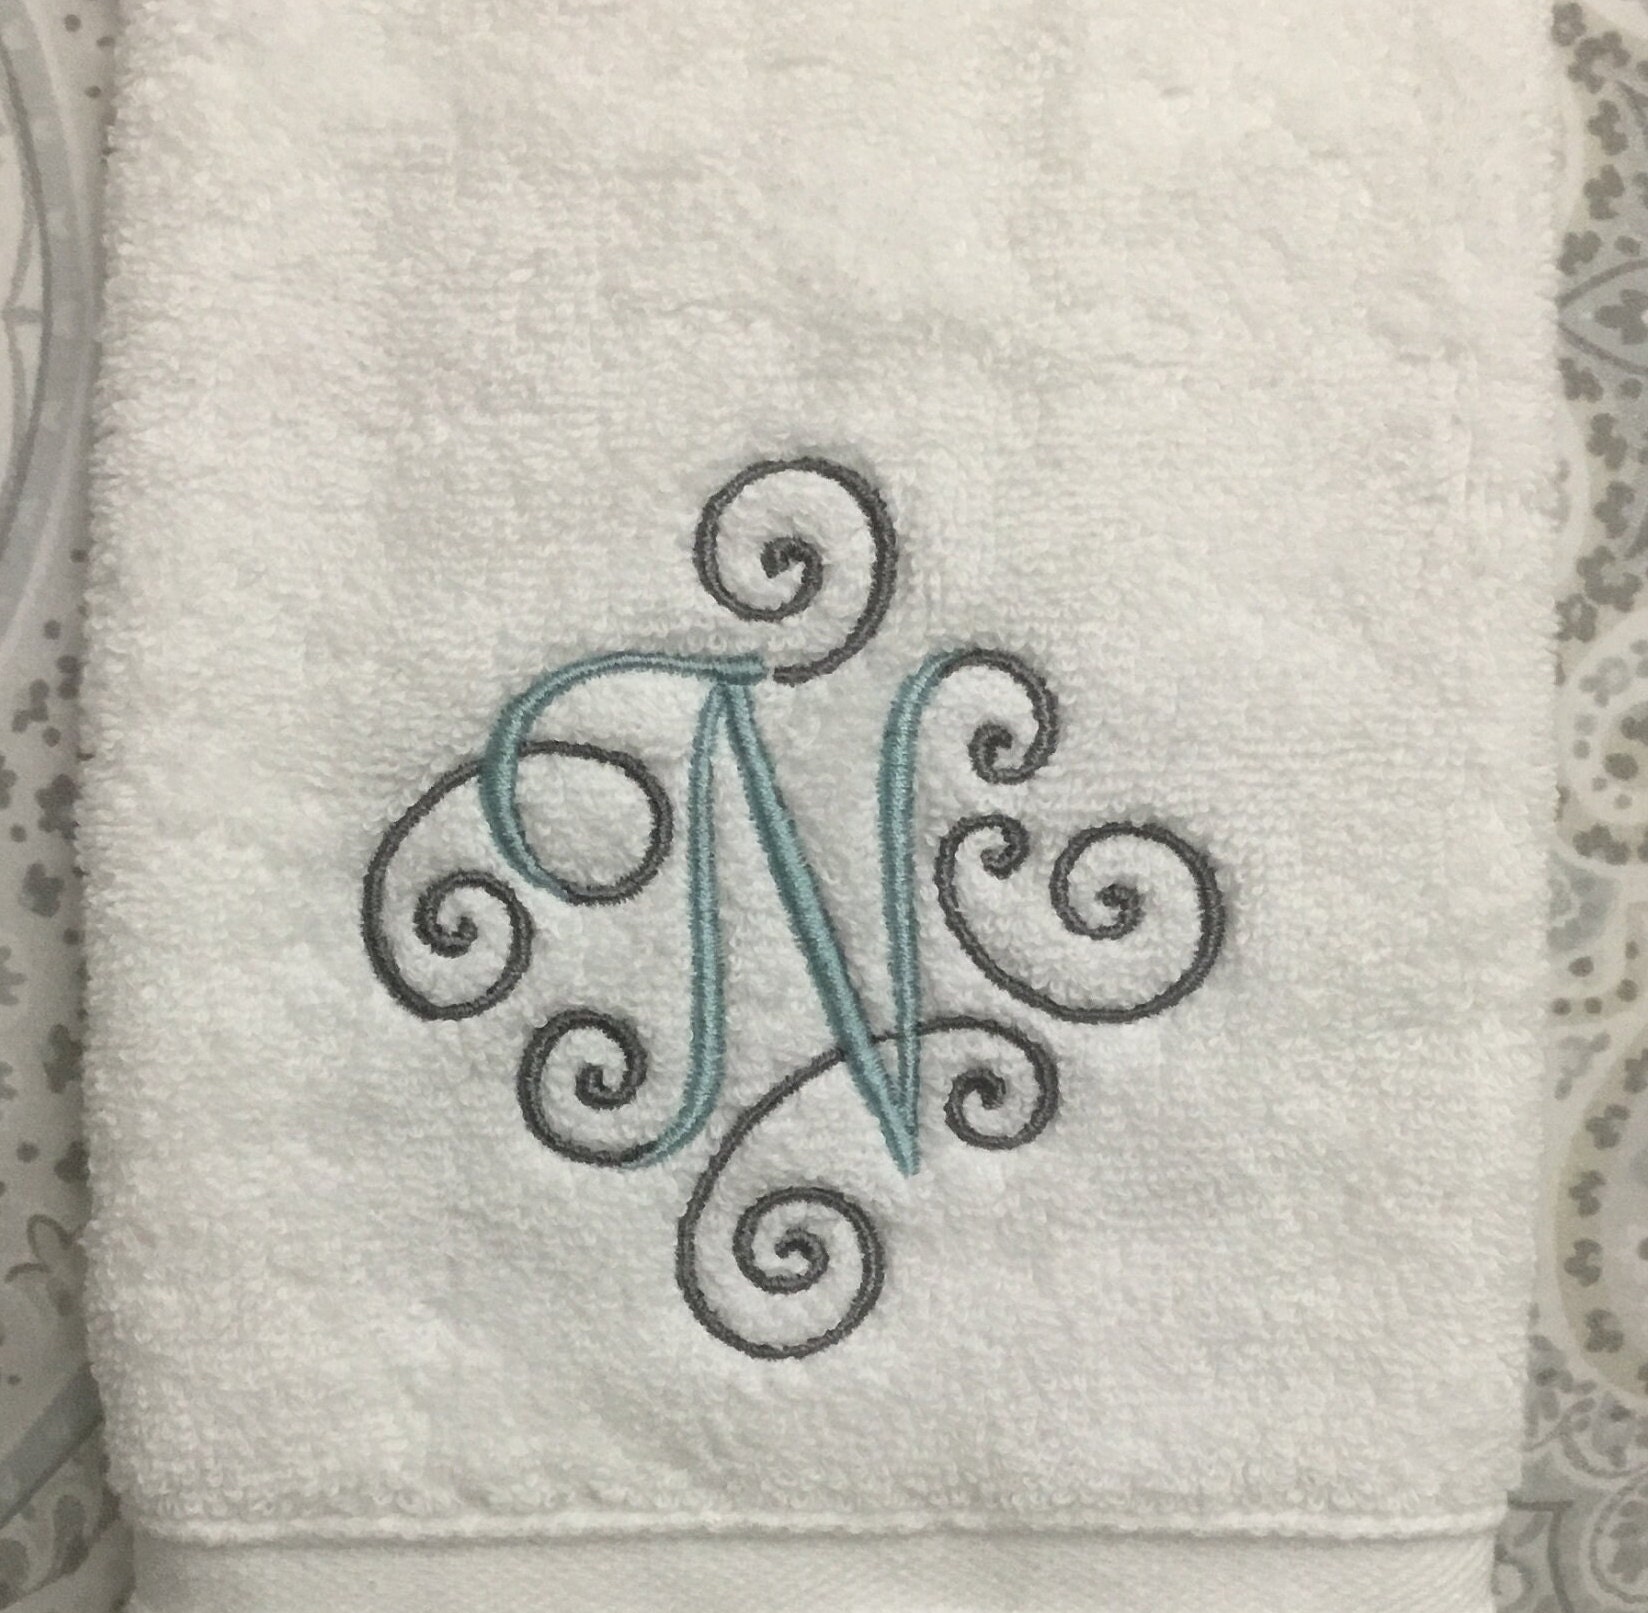 Kaufman - Personalized Luxury Hotel Quality Towels Embroidered (2 Bath  Towel, 2 Hand Towel, & 2 Washcloth) White Towel Set with Monogrammed Letter